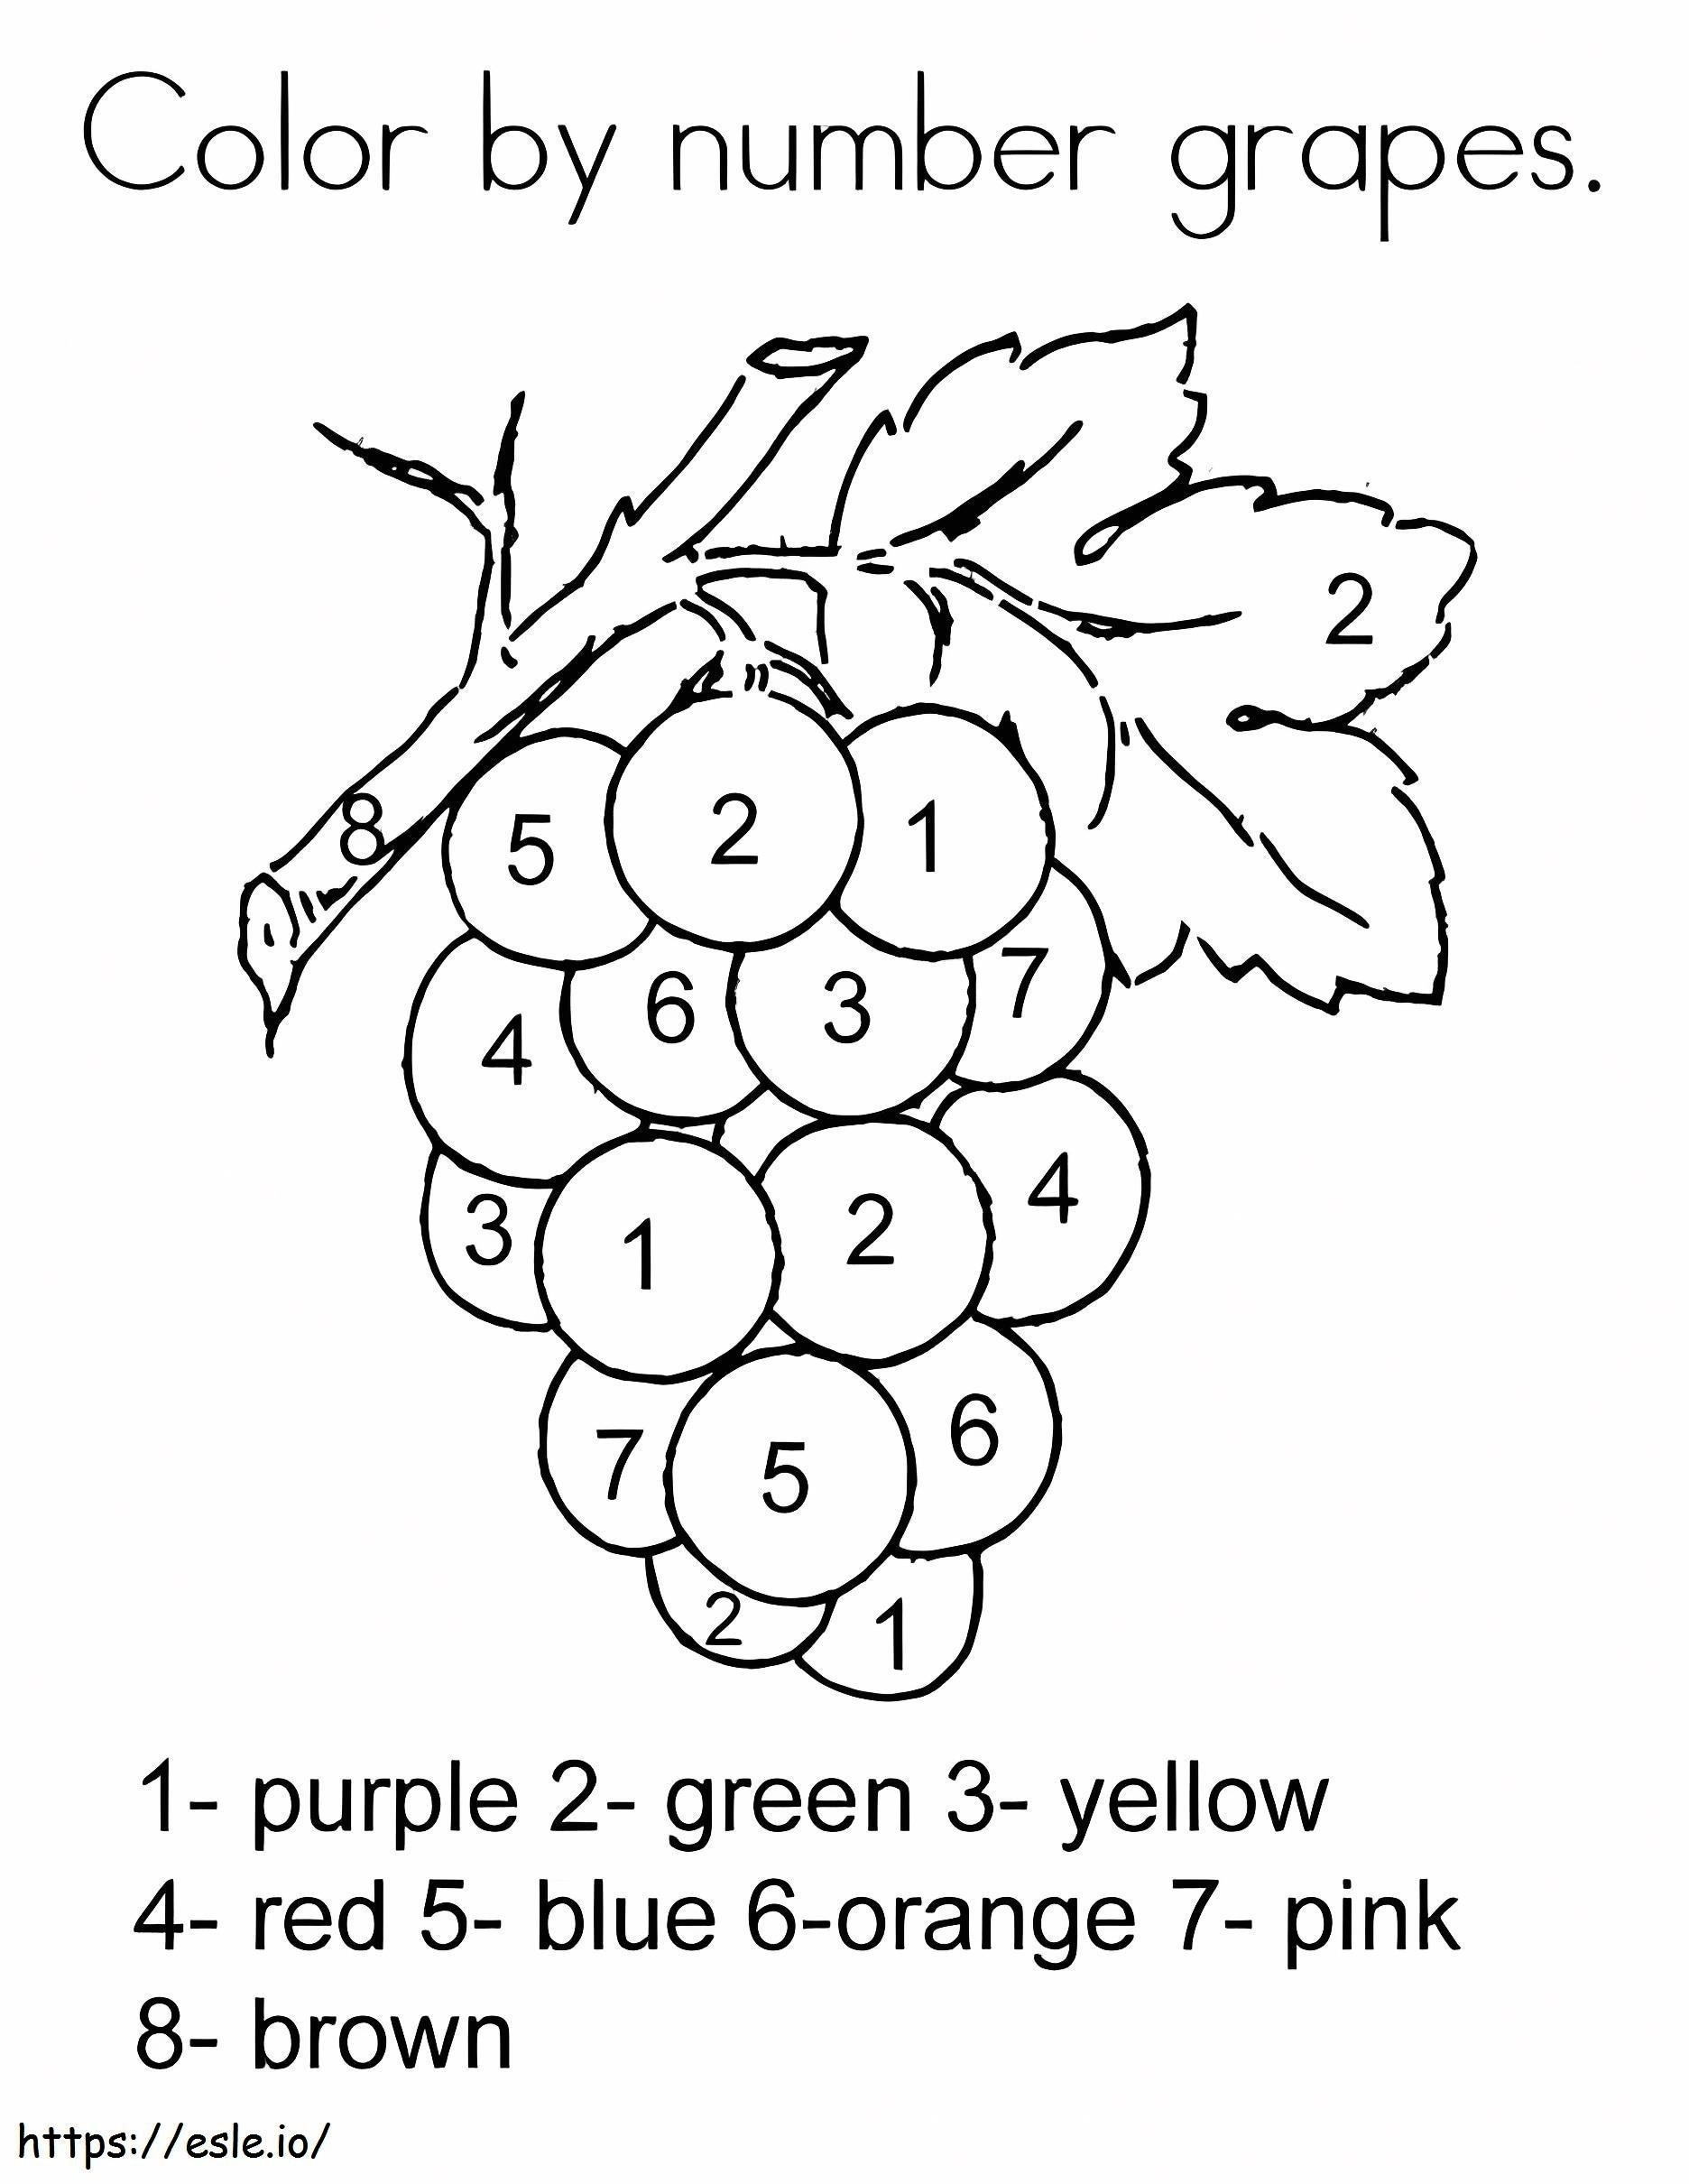 Grapes Color By Number coloring page